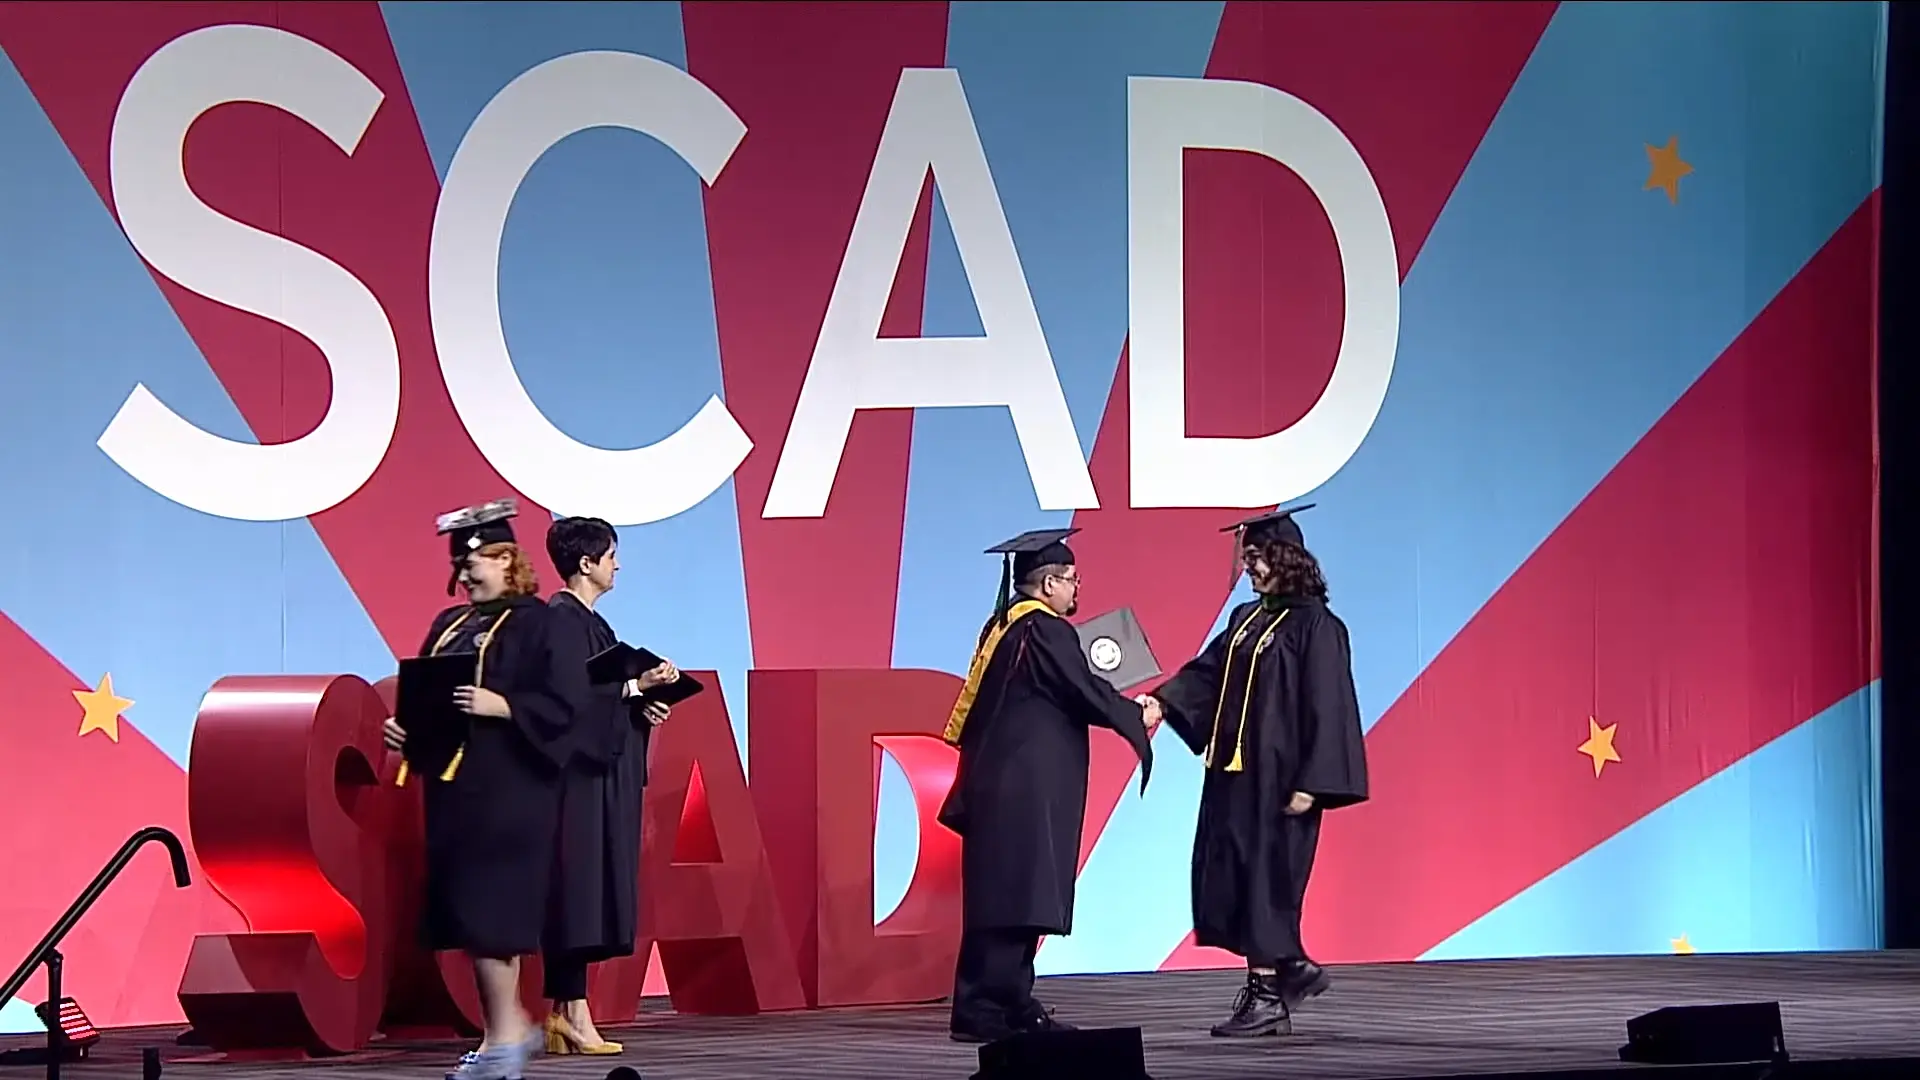 Alicia Drinkwater shaking hands with another design industry professional on stage at SCAD in Georgia.